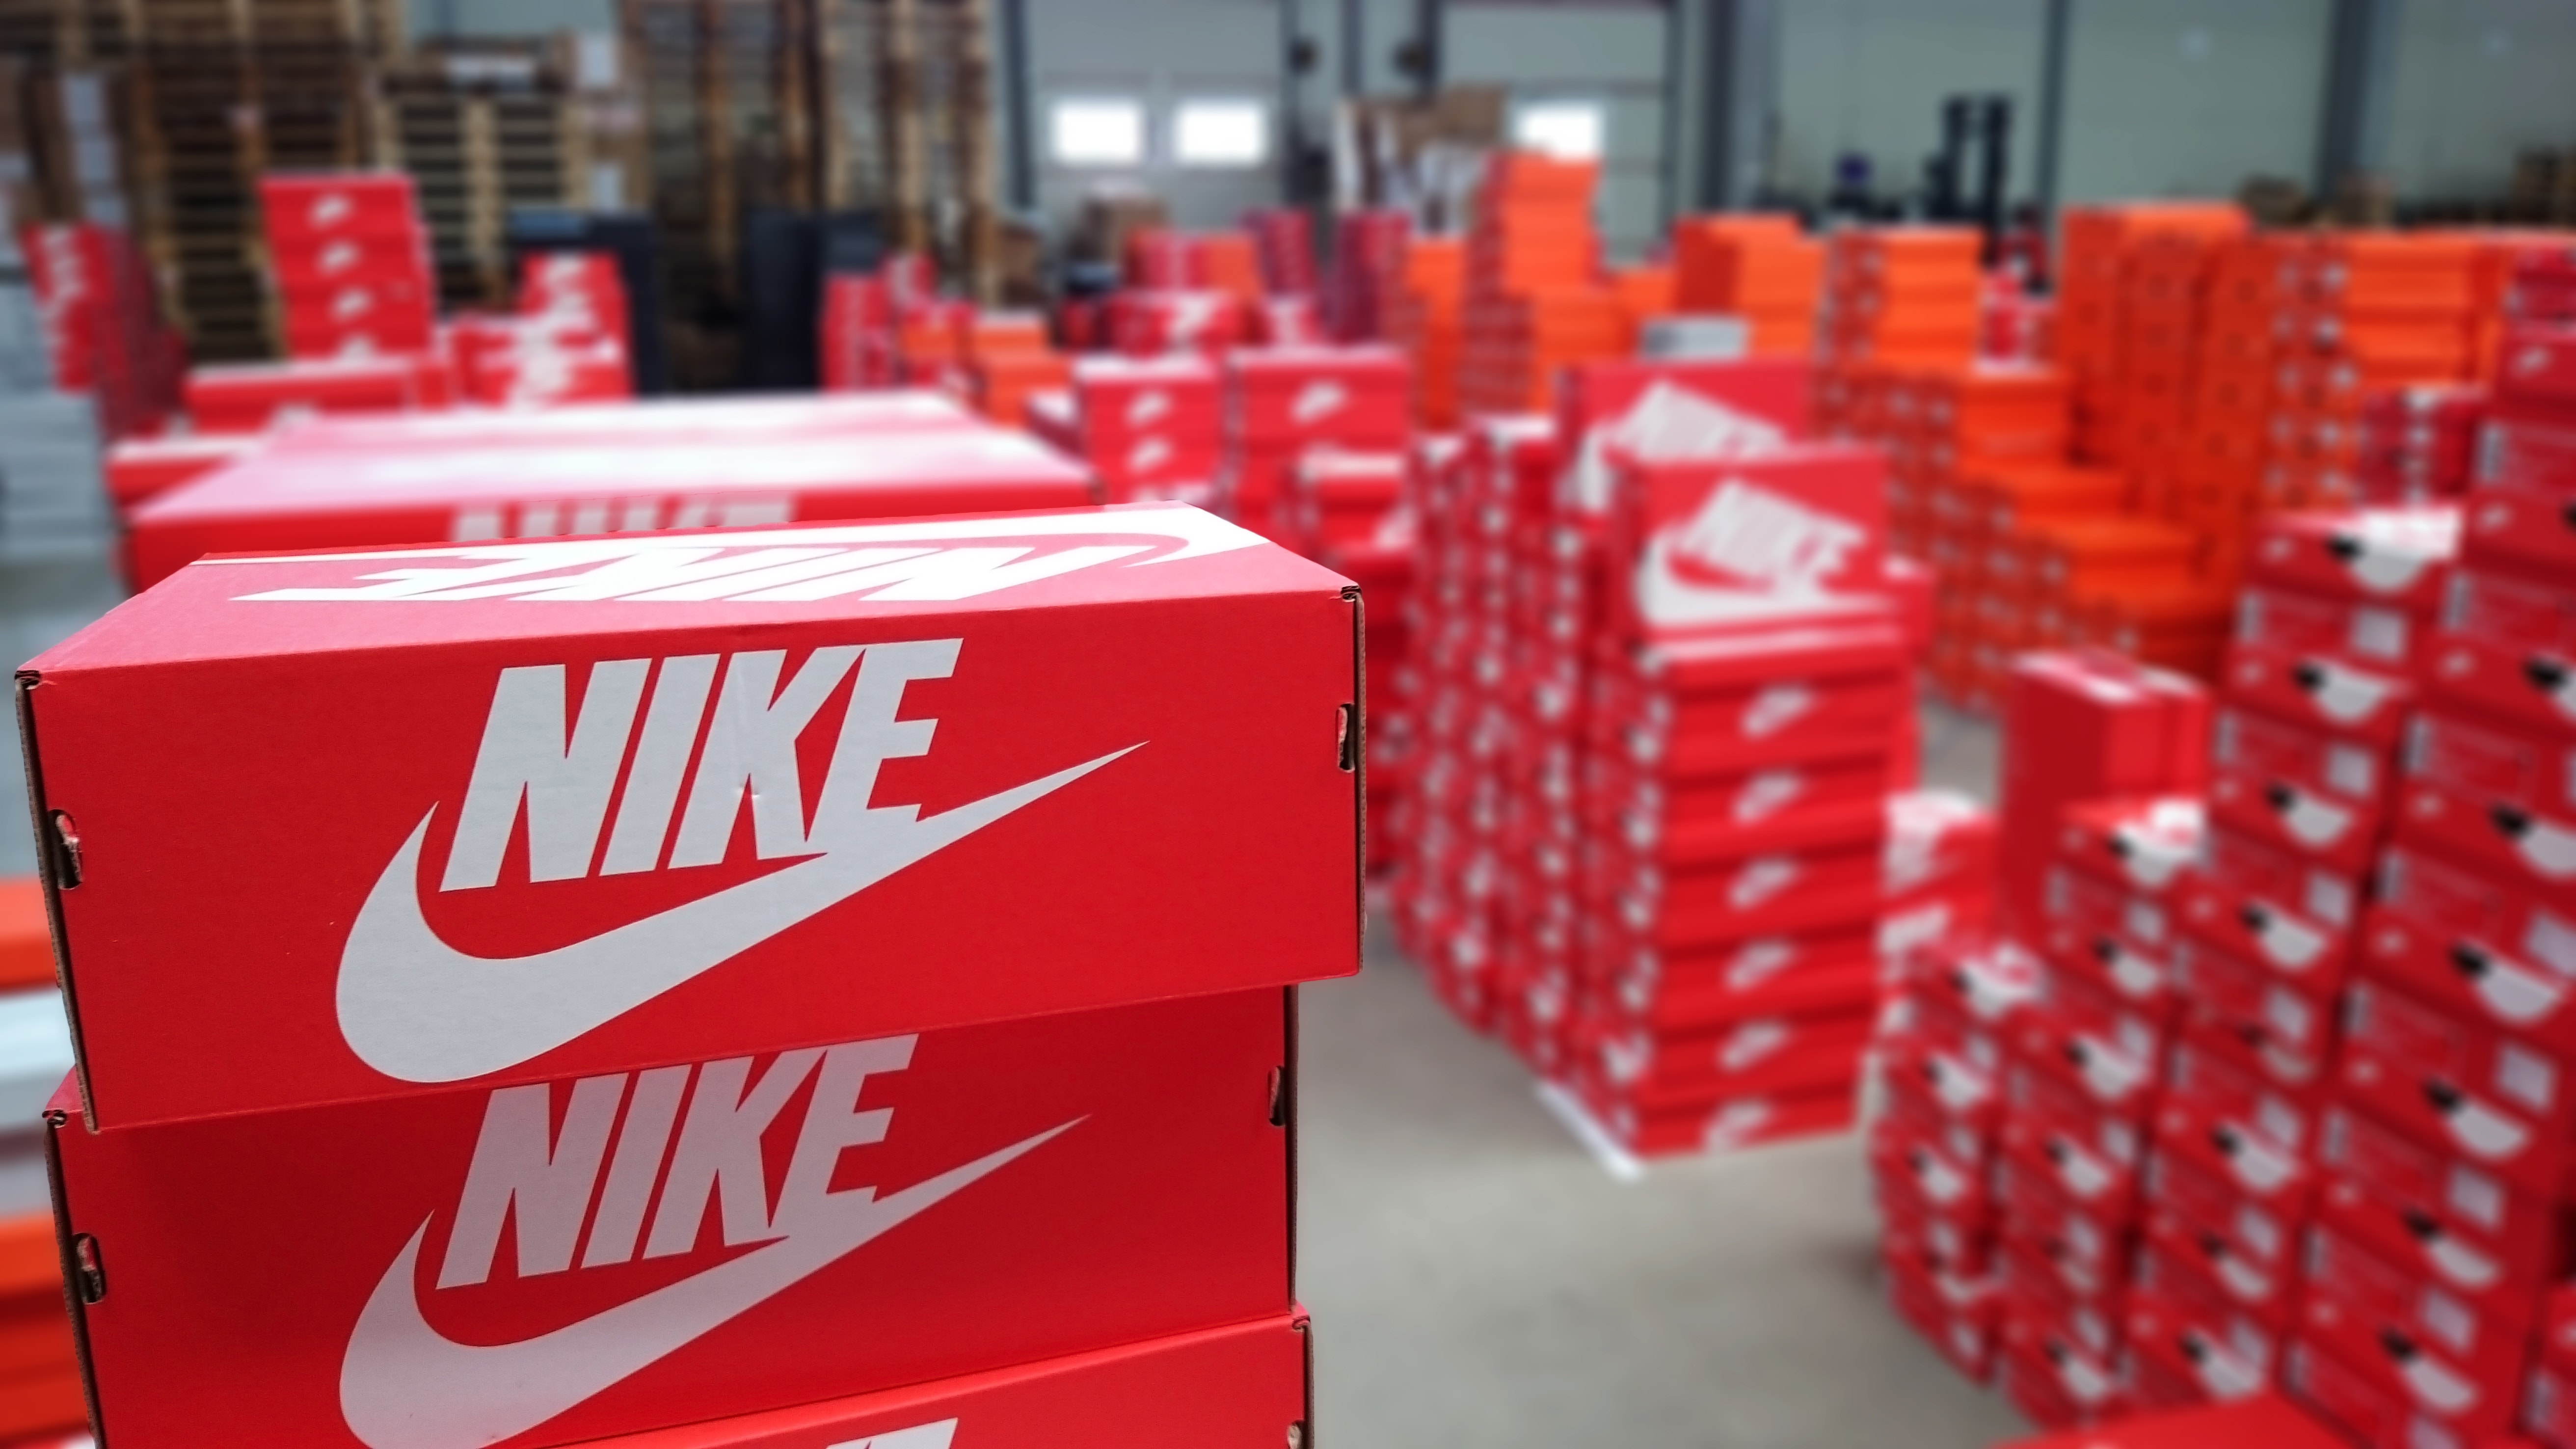 Nike Q1 Earnings Highlights: Revenue And EPS Beat, Investors Pull Back On Inventory, China Concerns